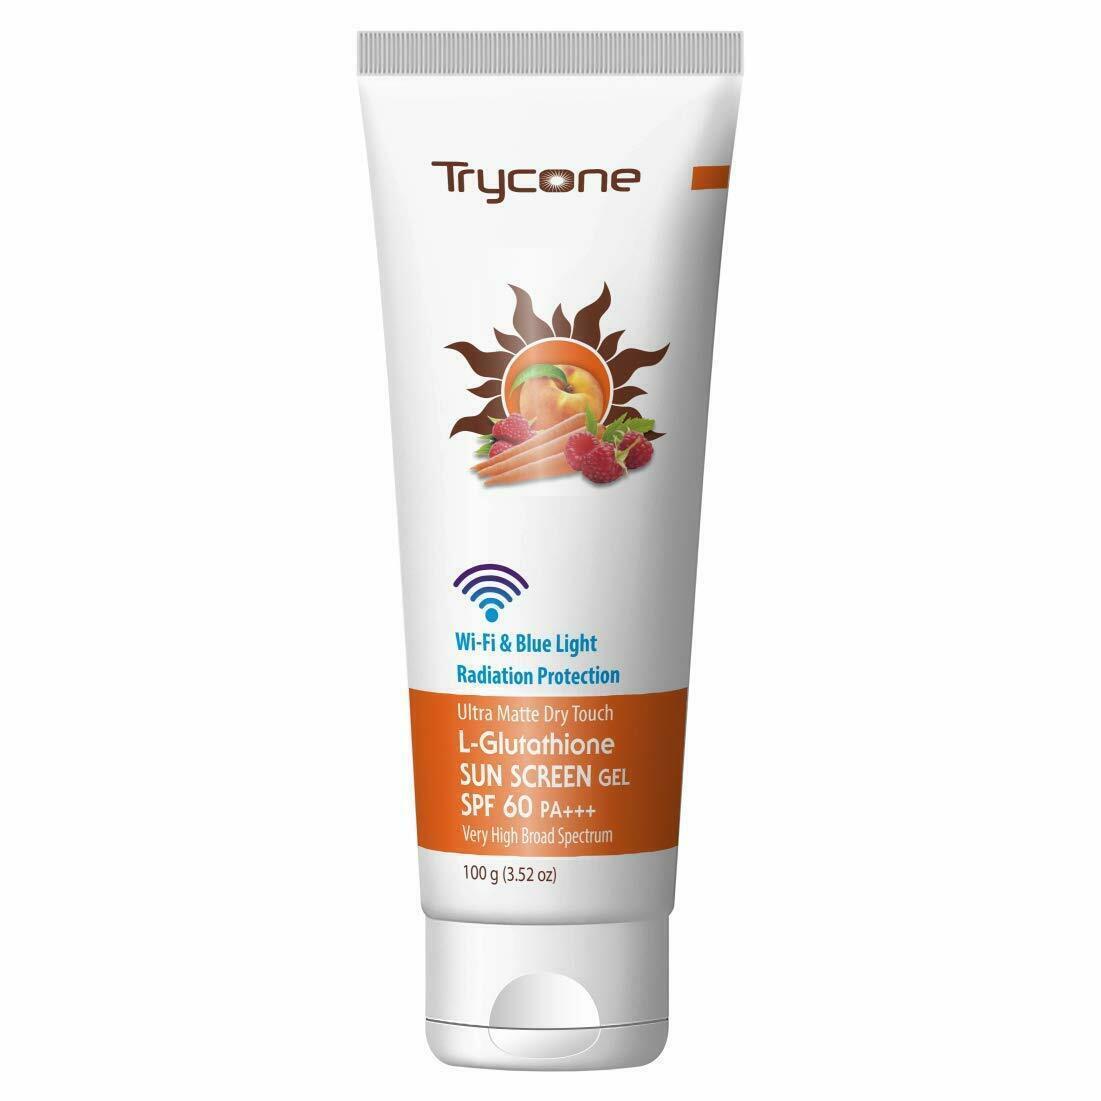 Primary image for Trycone Ultra Matte Dry Touch L- Glutathione Sunscreen Gel, 100g Free Shipping